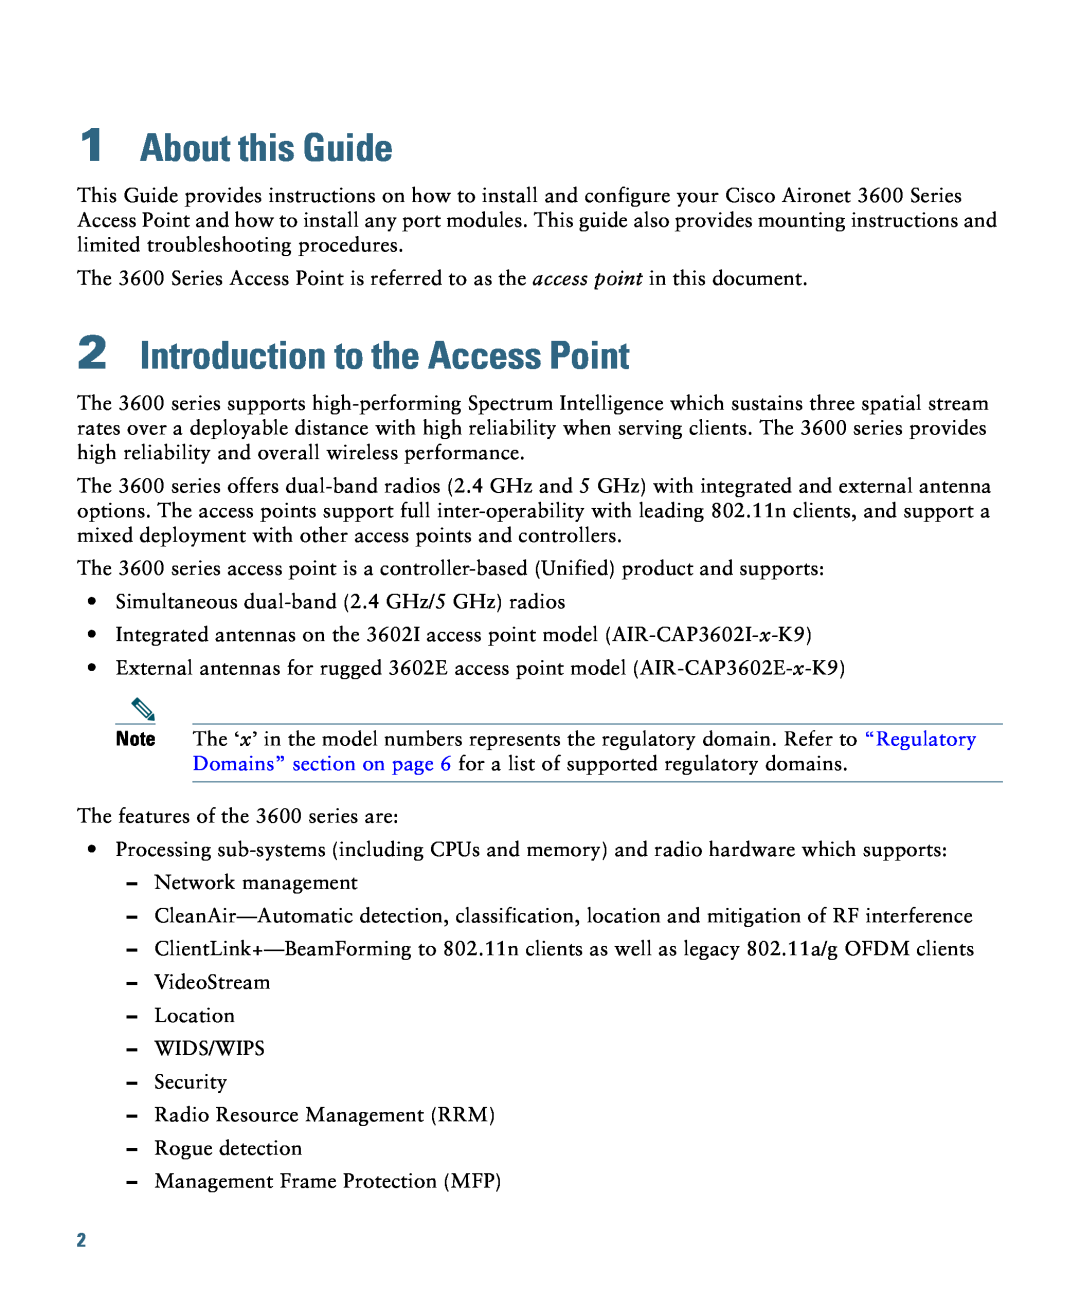 Cisco Systems AIRCAP3602EAK9, AIRCAP3602ITK9, AIRCAP3602IAK9RF About this Guide, Introduction to the Access Point 